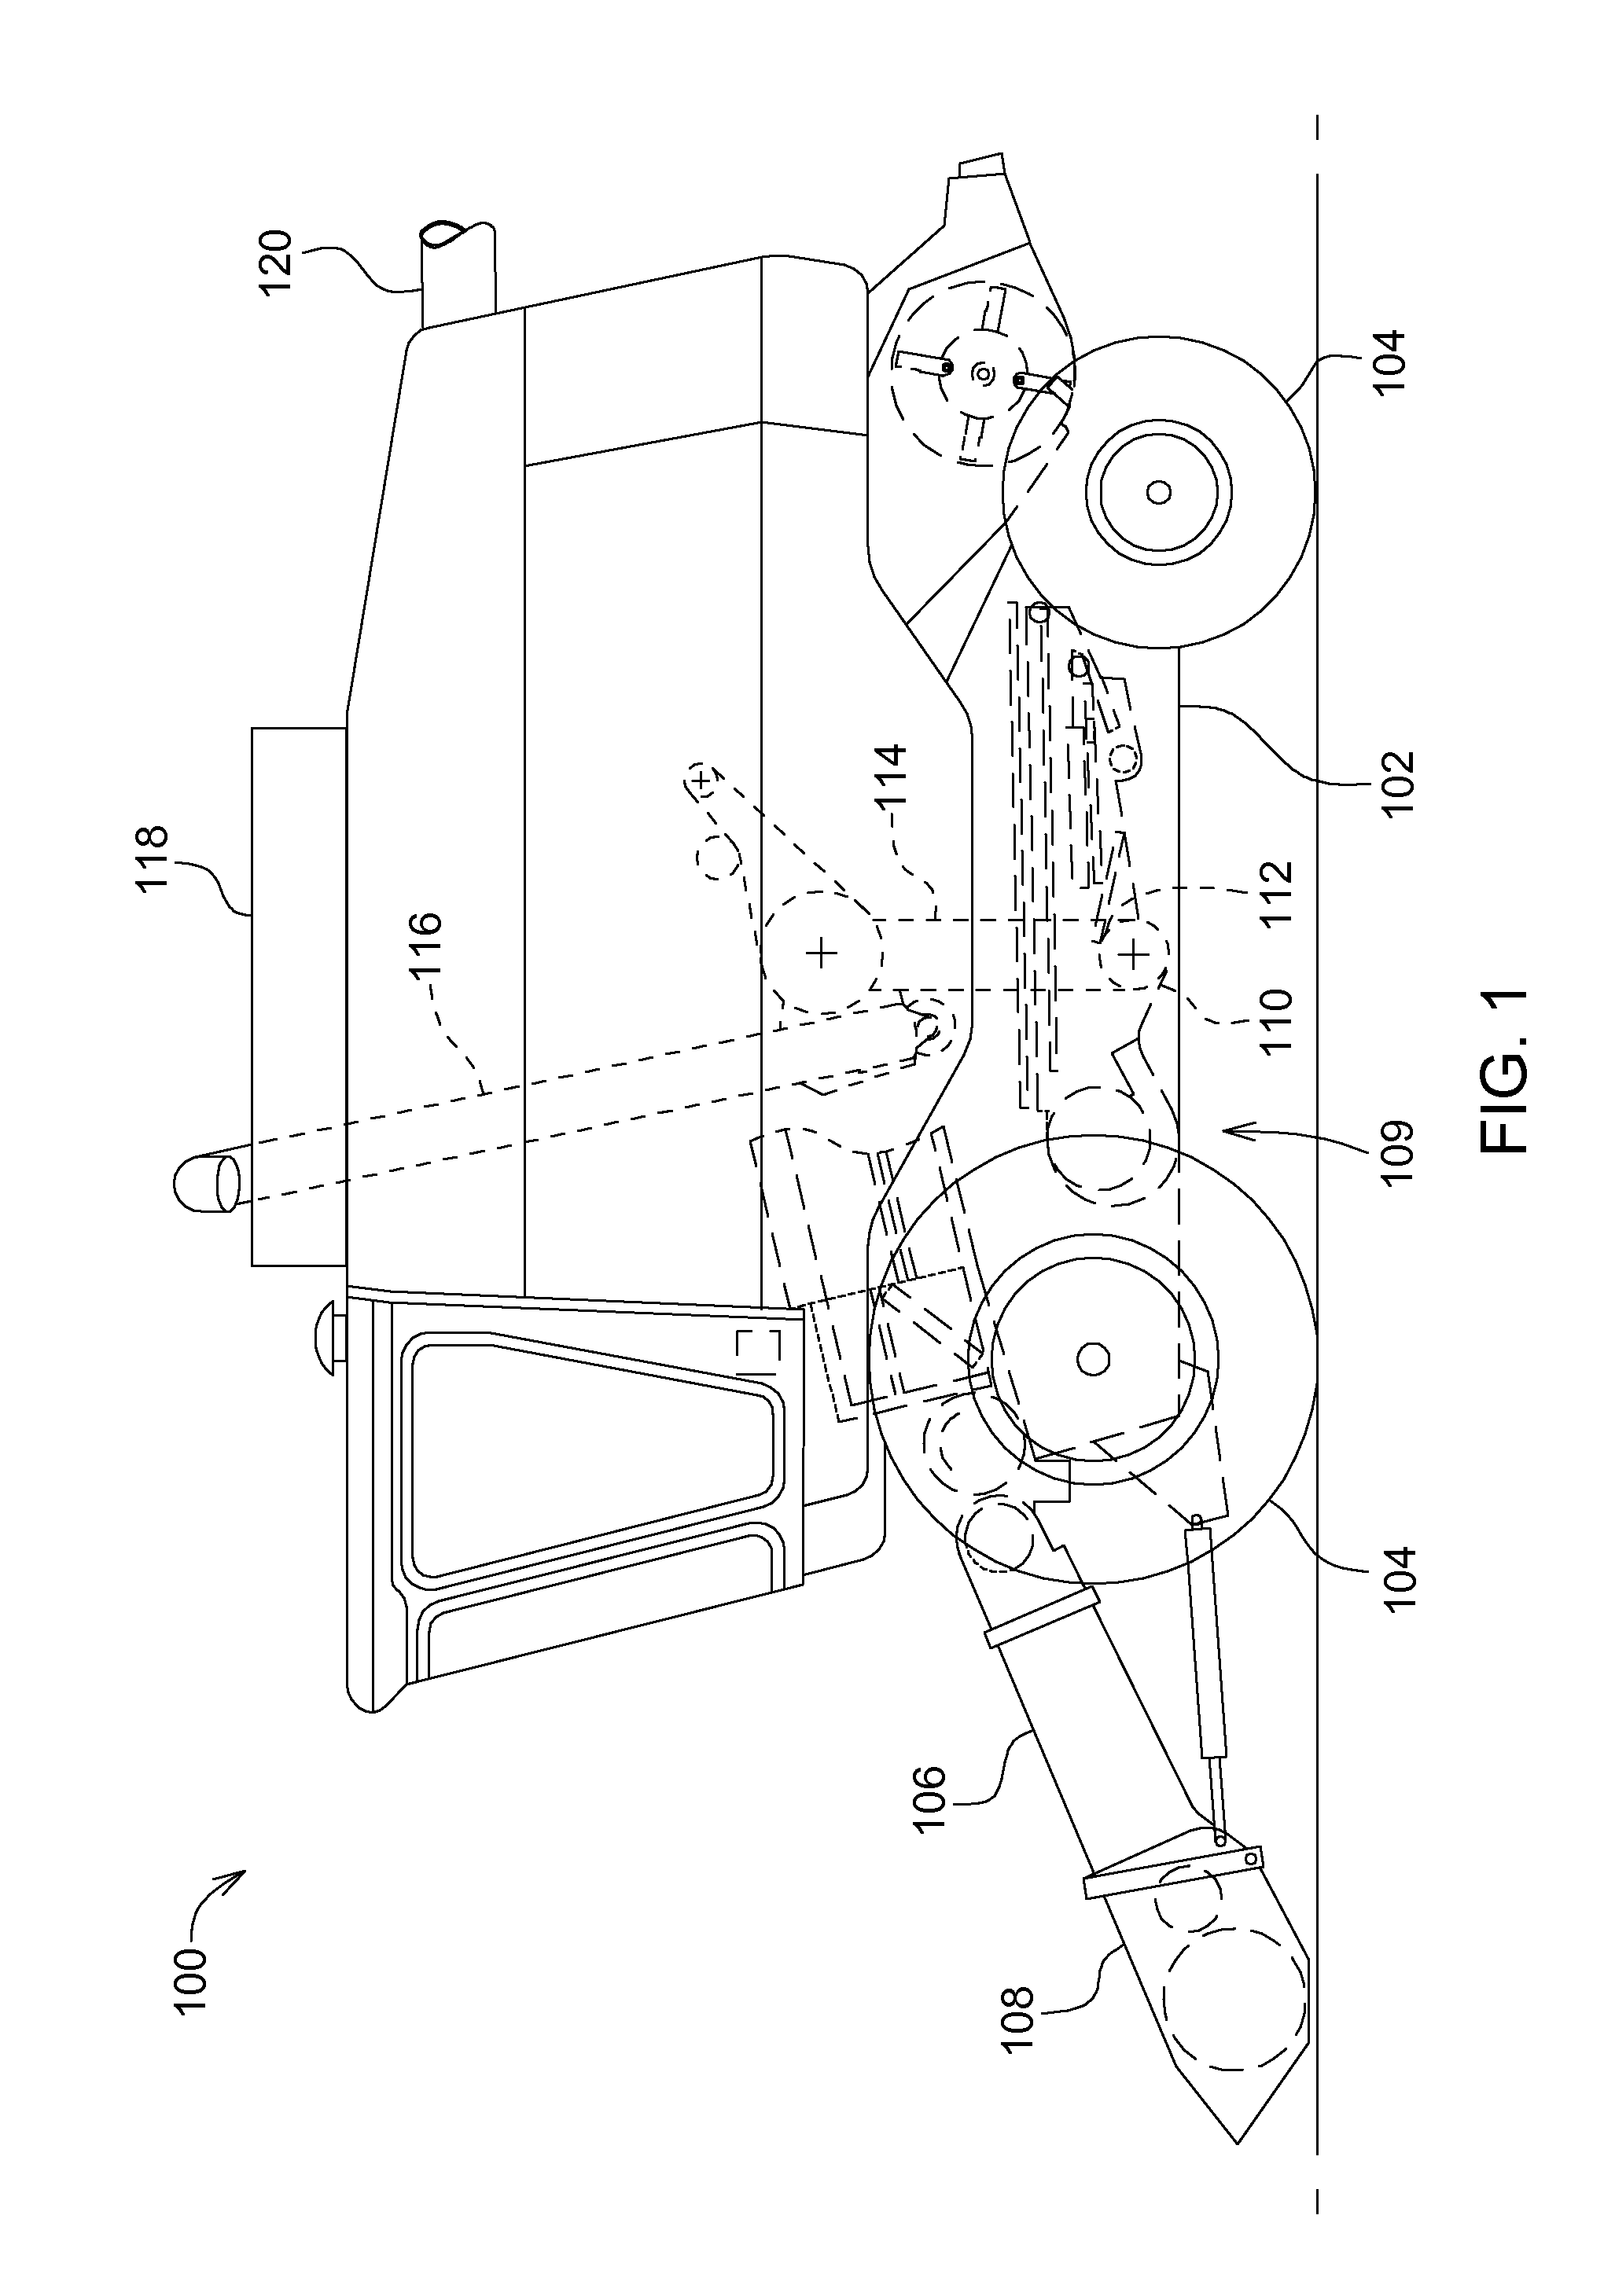 Agricultural harvester with bevel gear drive